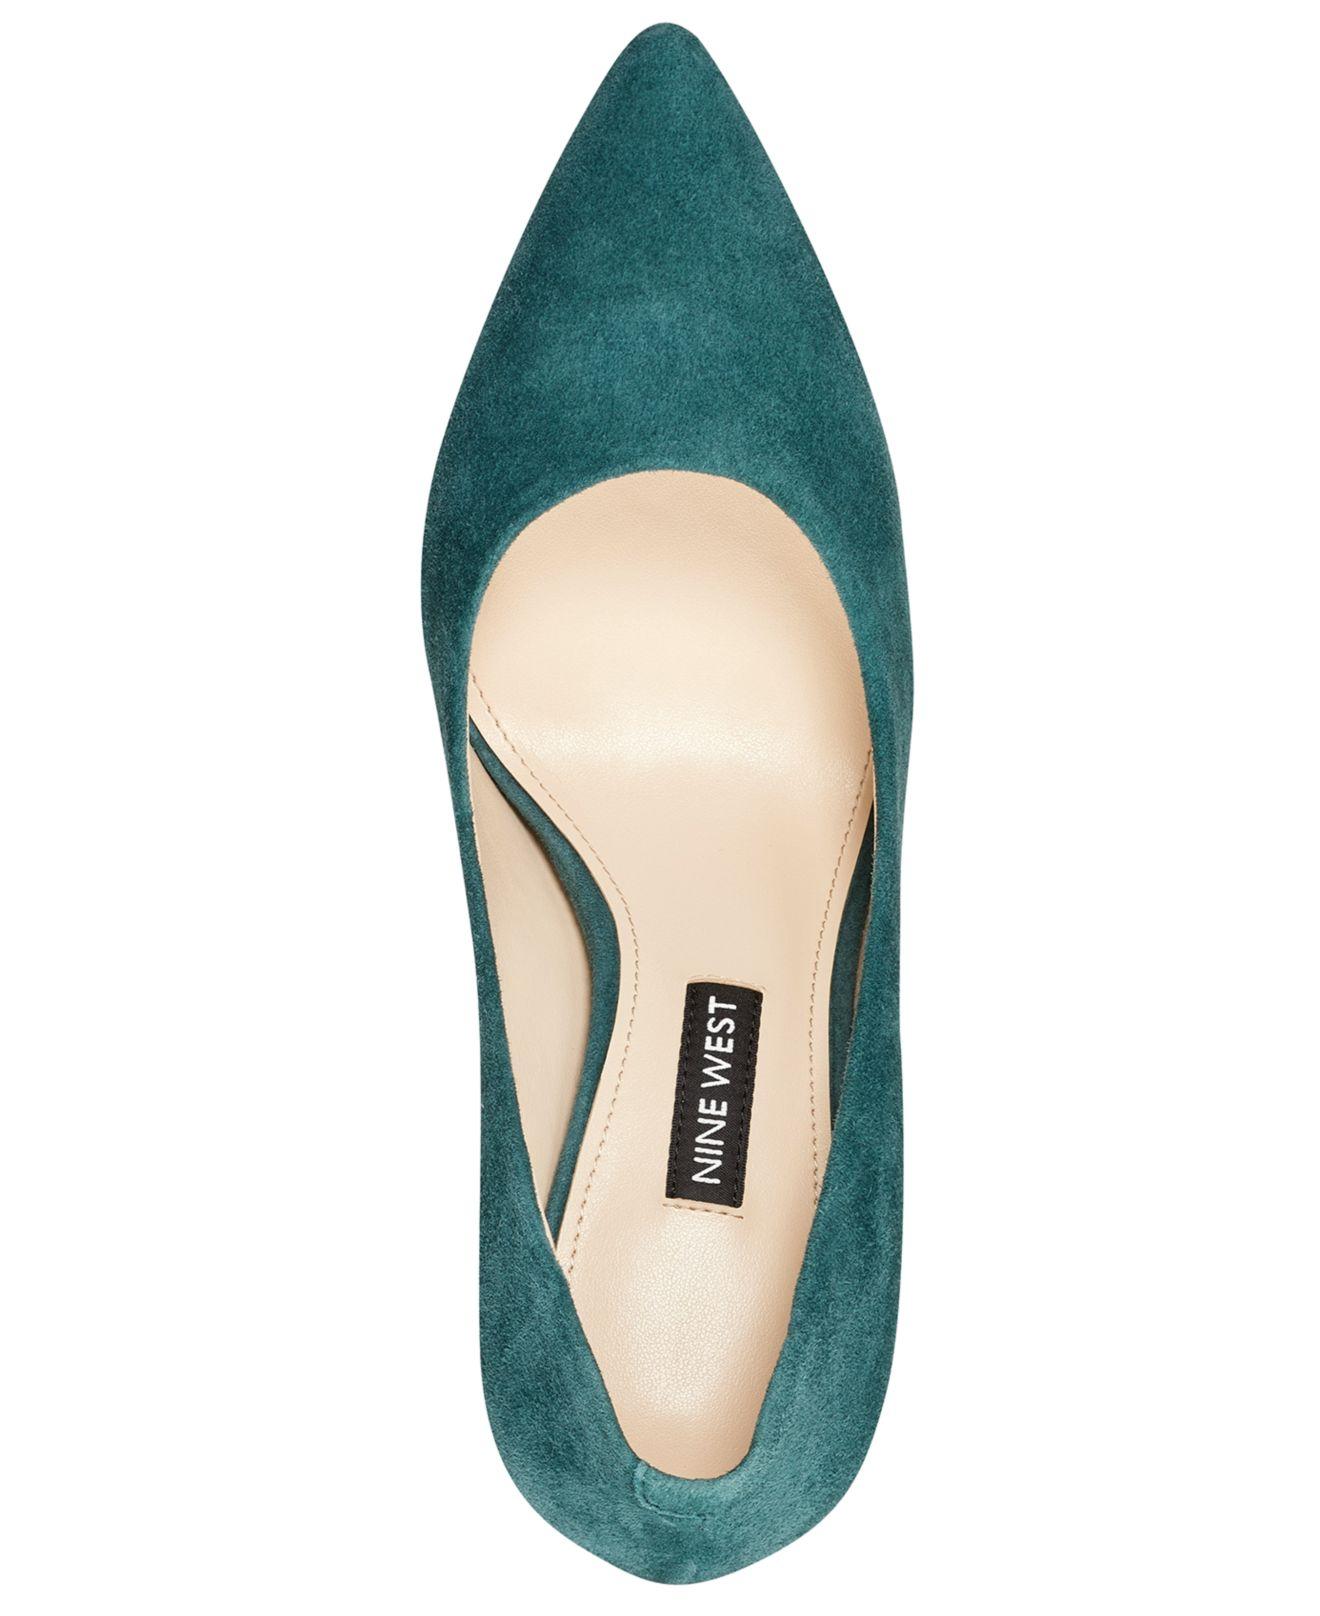 Nine West Flax Pointed Toe Pumps in Green | Lyst